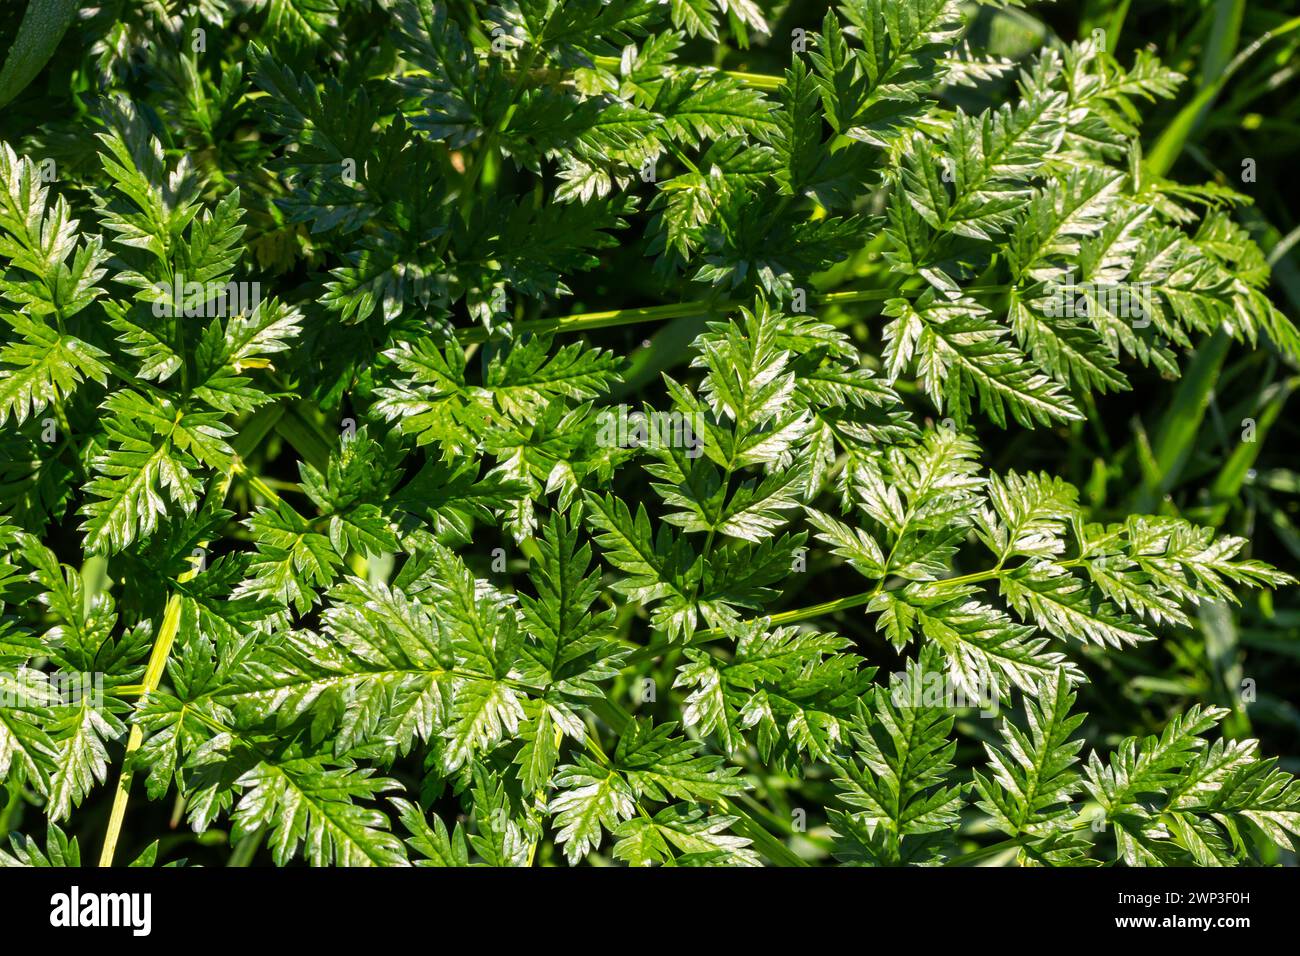 Green leaves of a Conium maculatum poison hemlock poisonous plant close-up. Concept of the texture of natural patterns, ornaments. Stock Photo